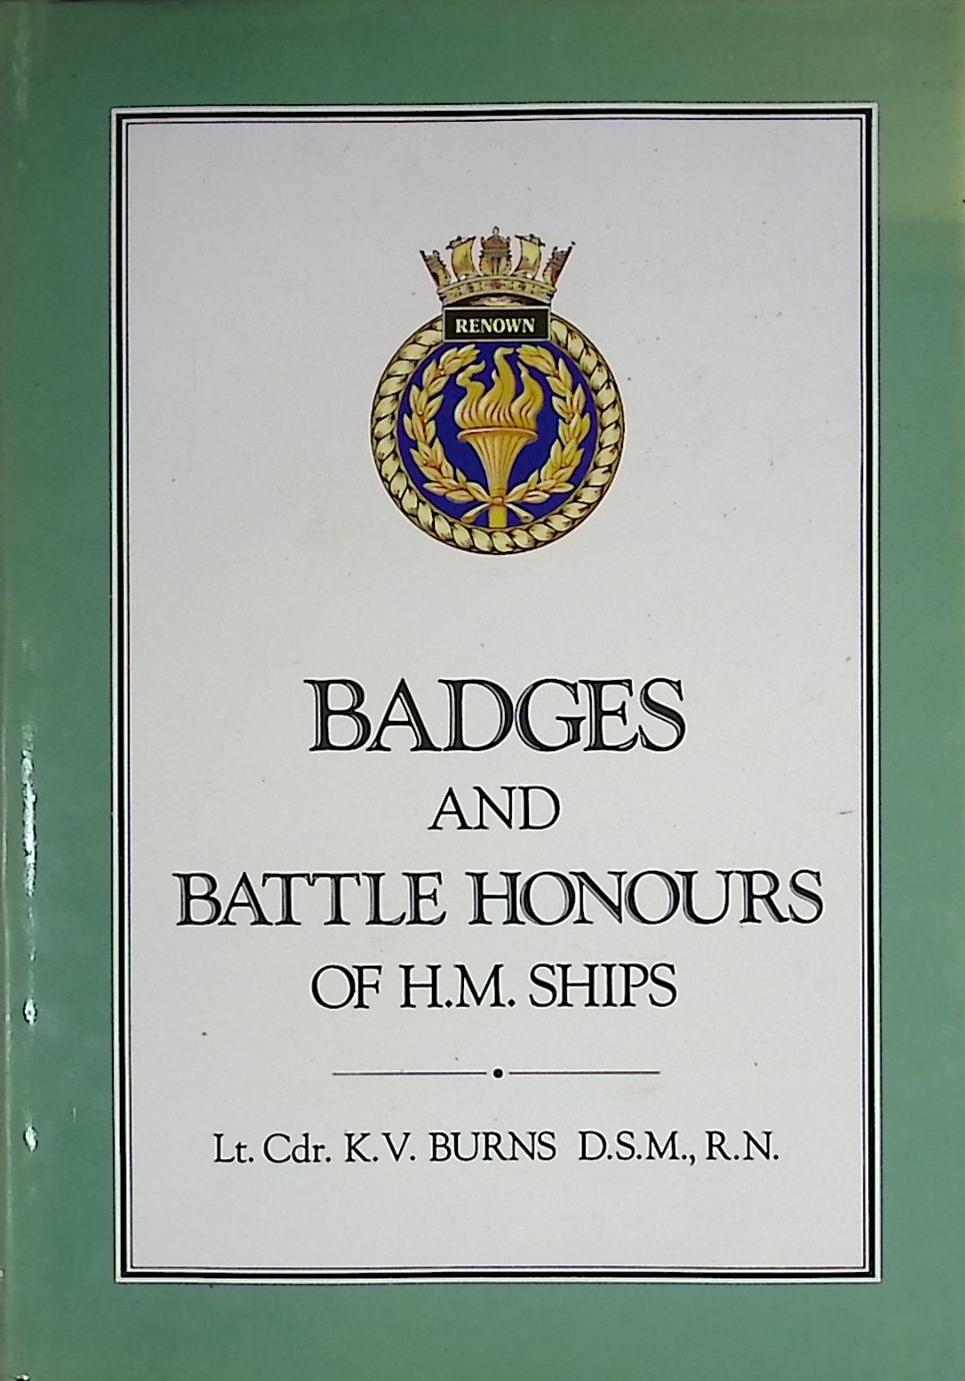 Badges and Battle Honours of H. M. Ships